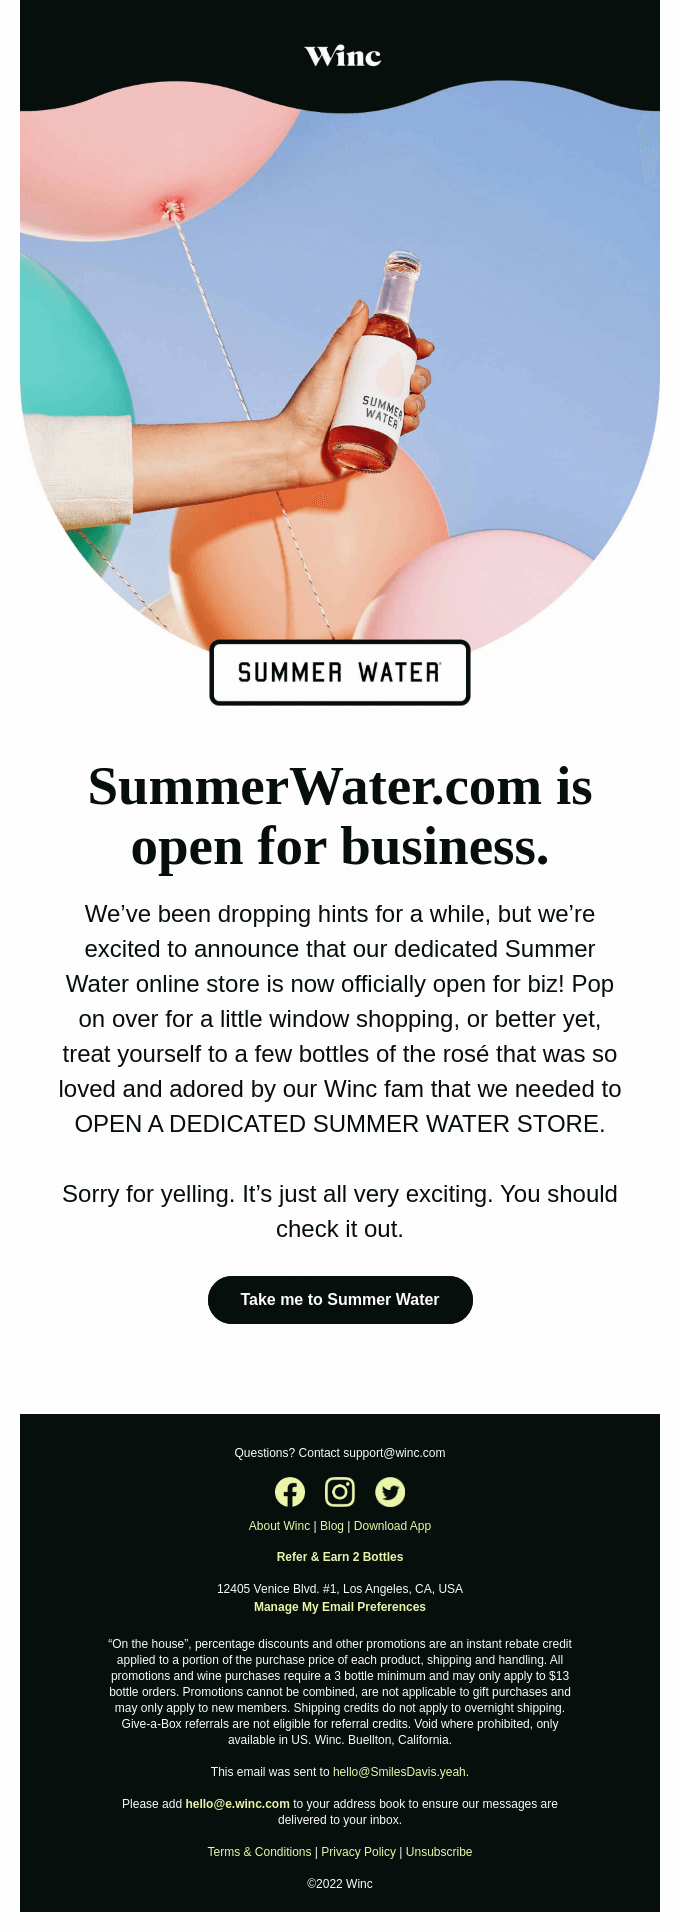 🚨ATTENTION 🚨 SummerWater.com is open for business